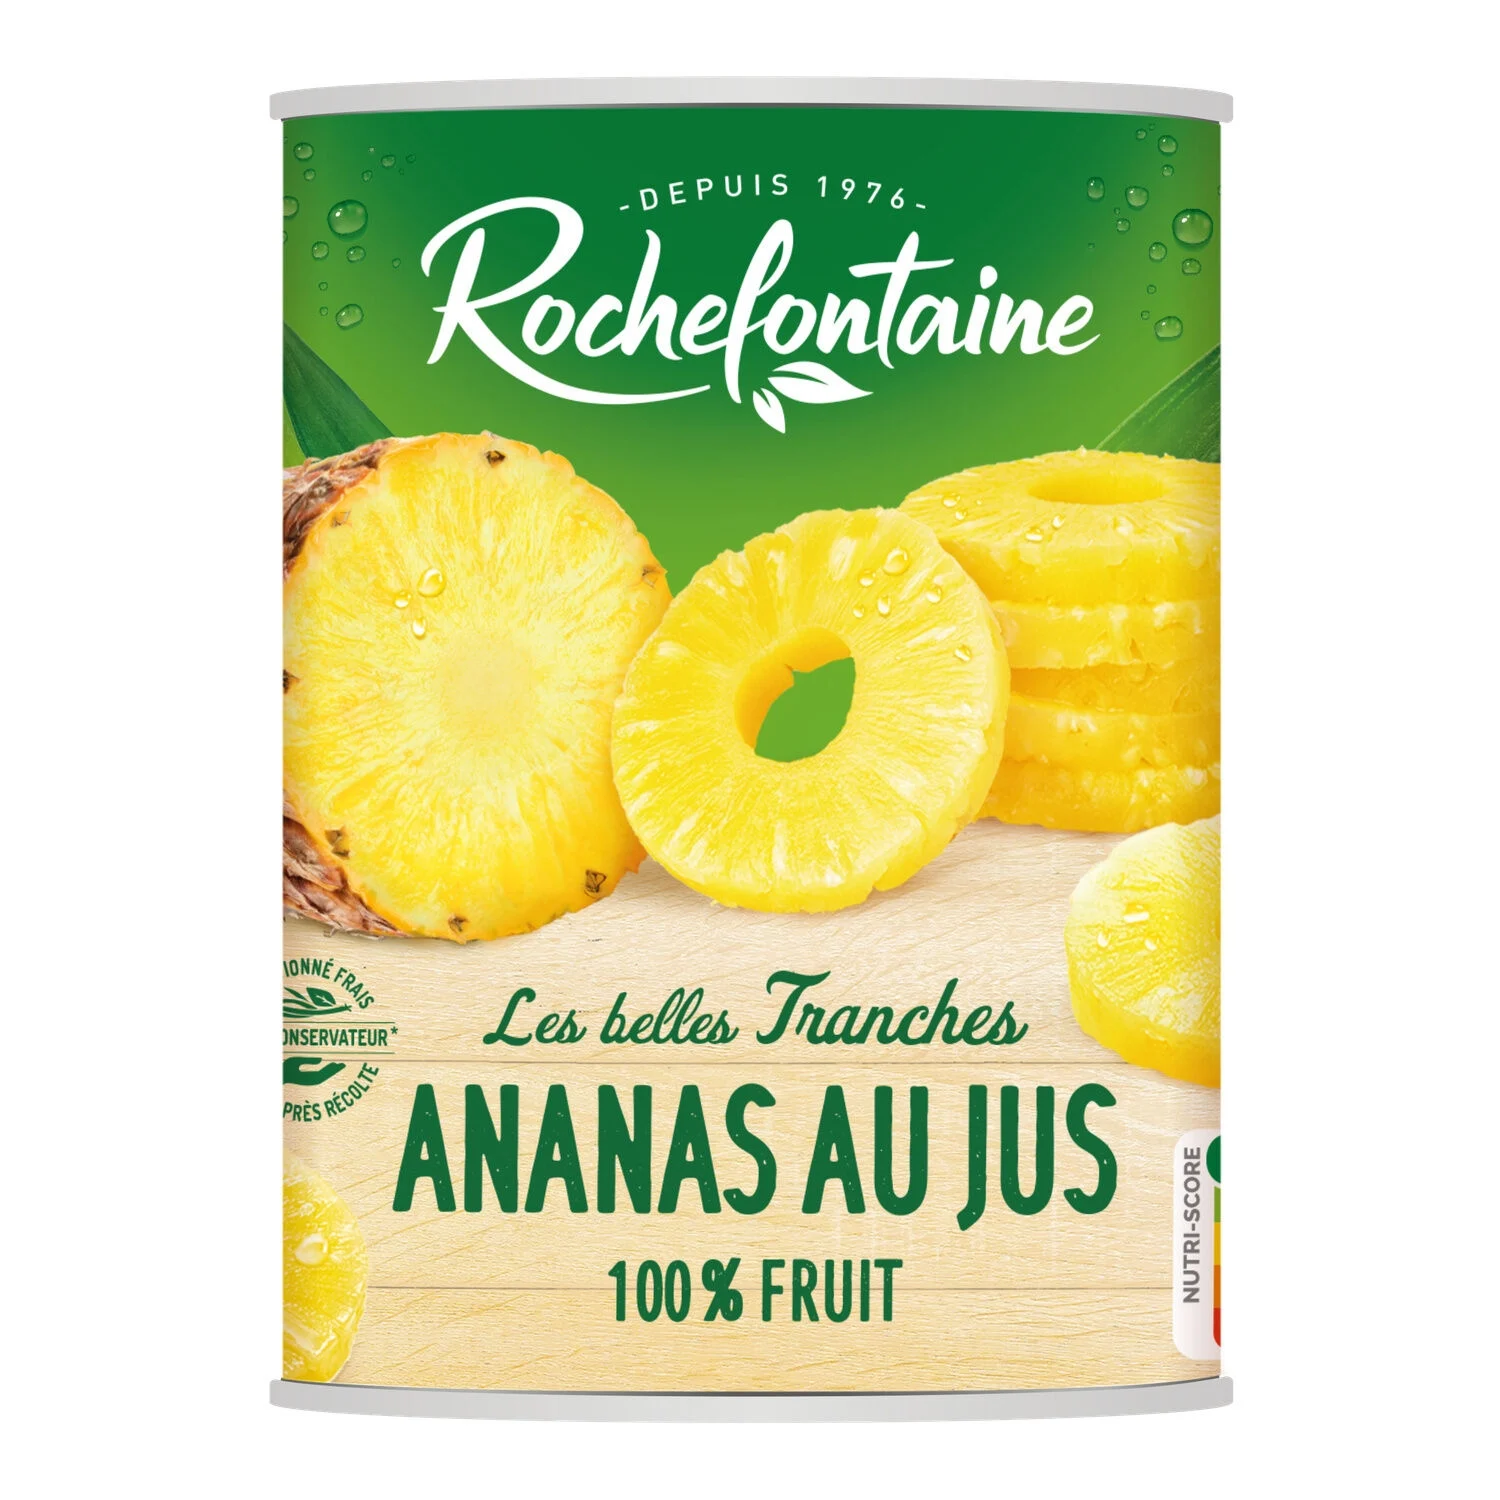 Fruits Au Sirop Ananas En Tranches Au Jus 565g - Rochefontaine